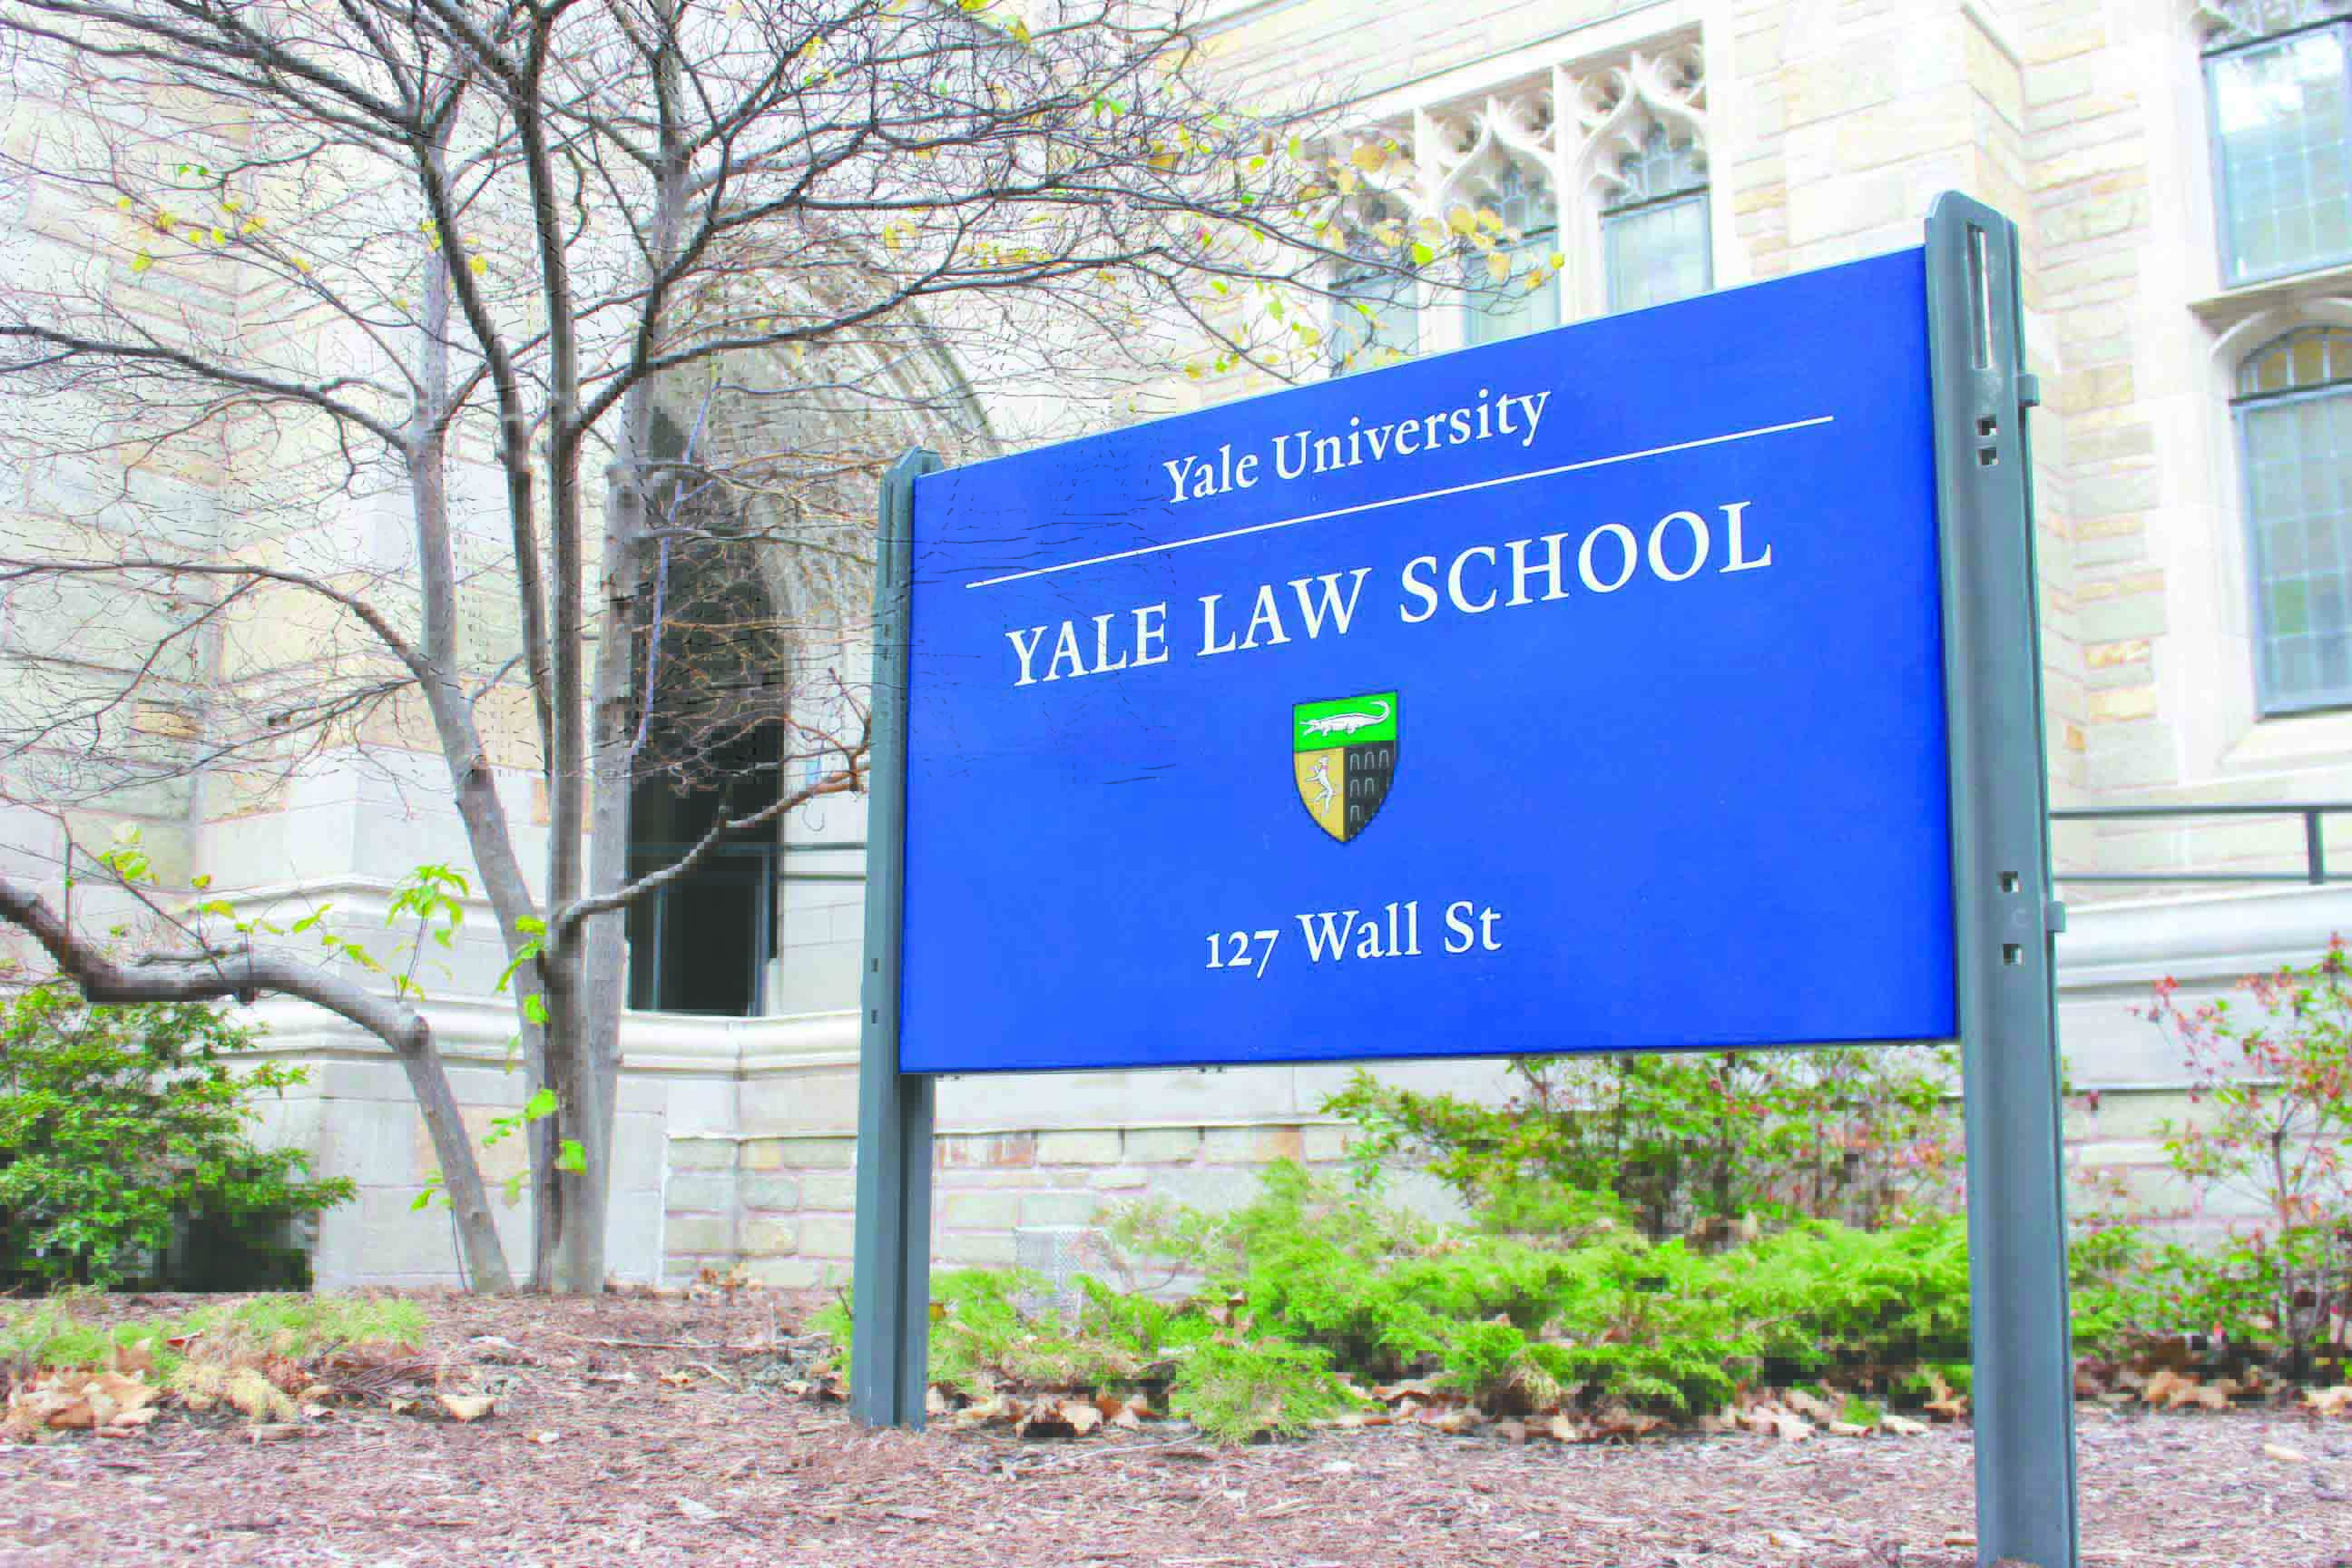 Law School opens doors to admitted students Yale Daily News